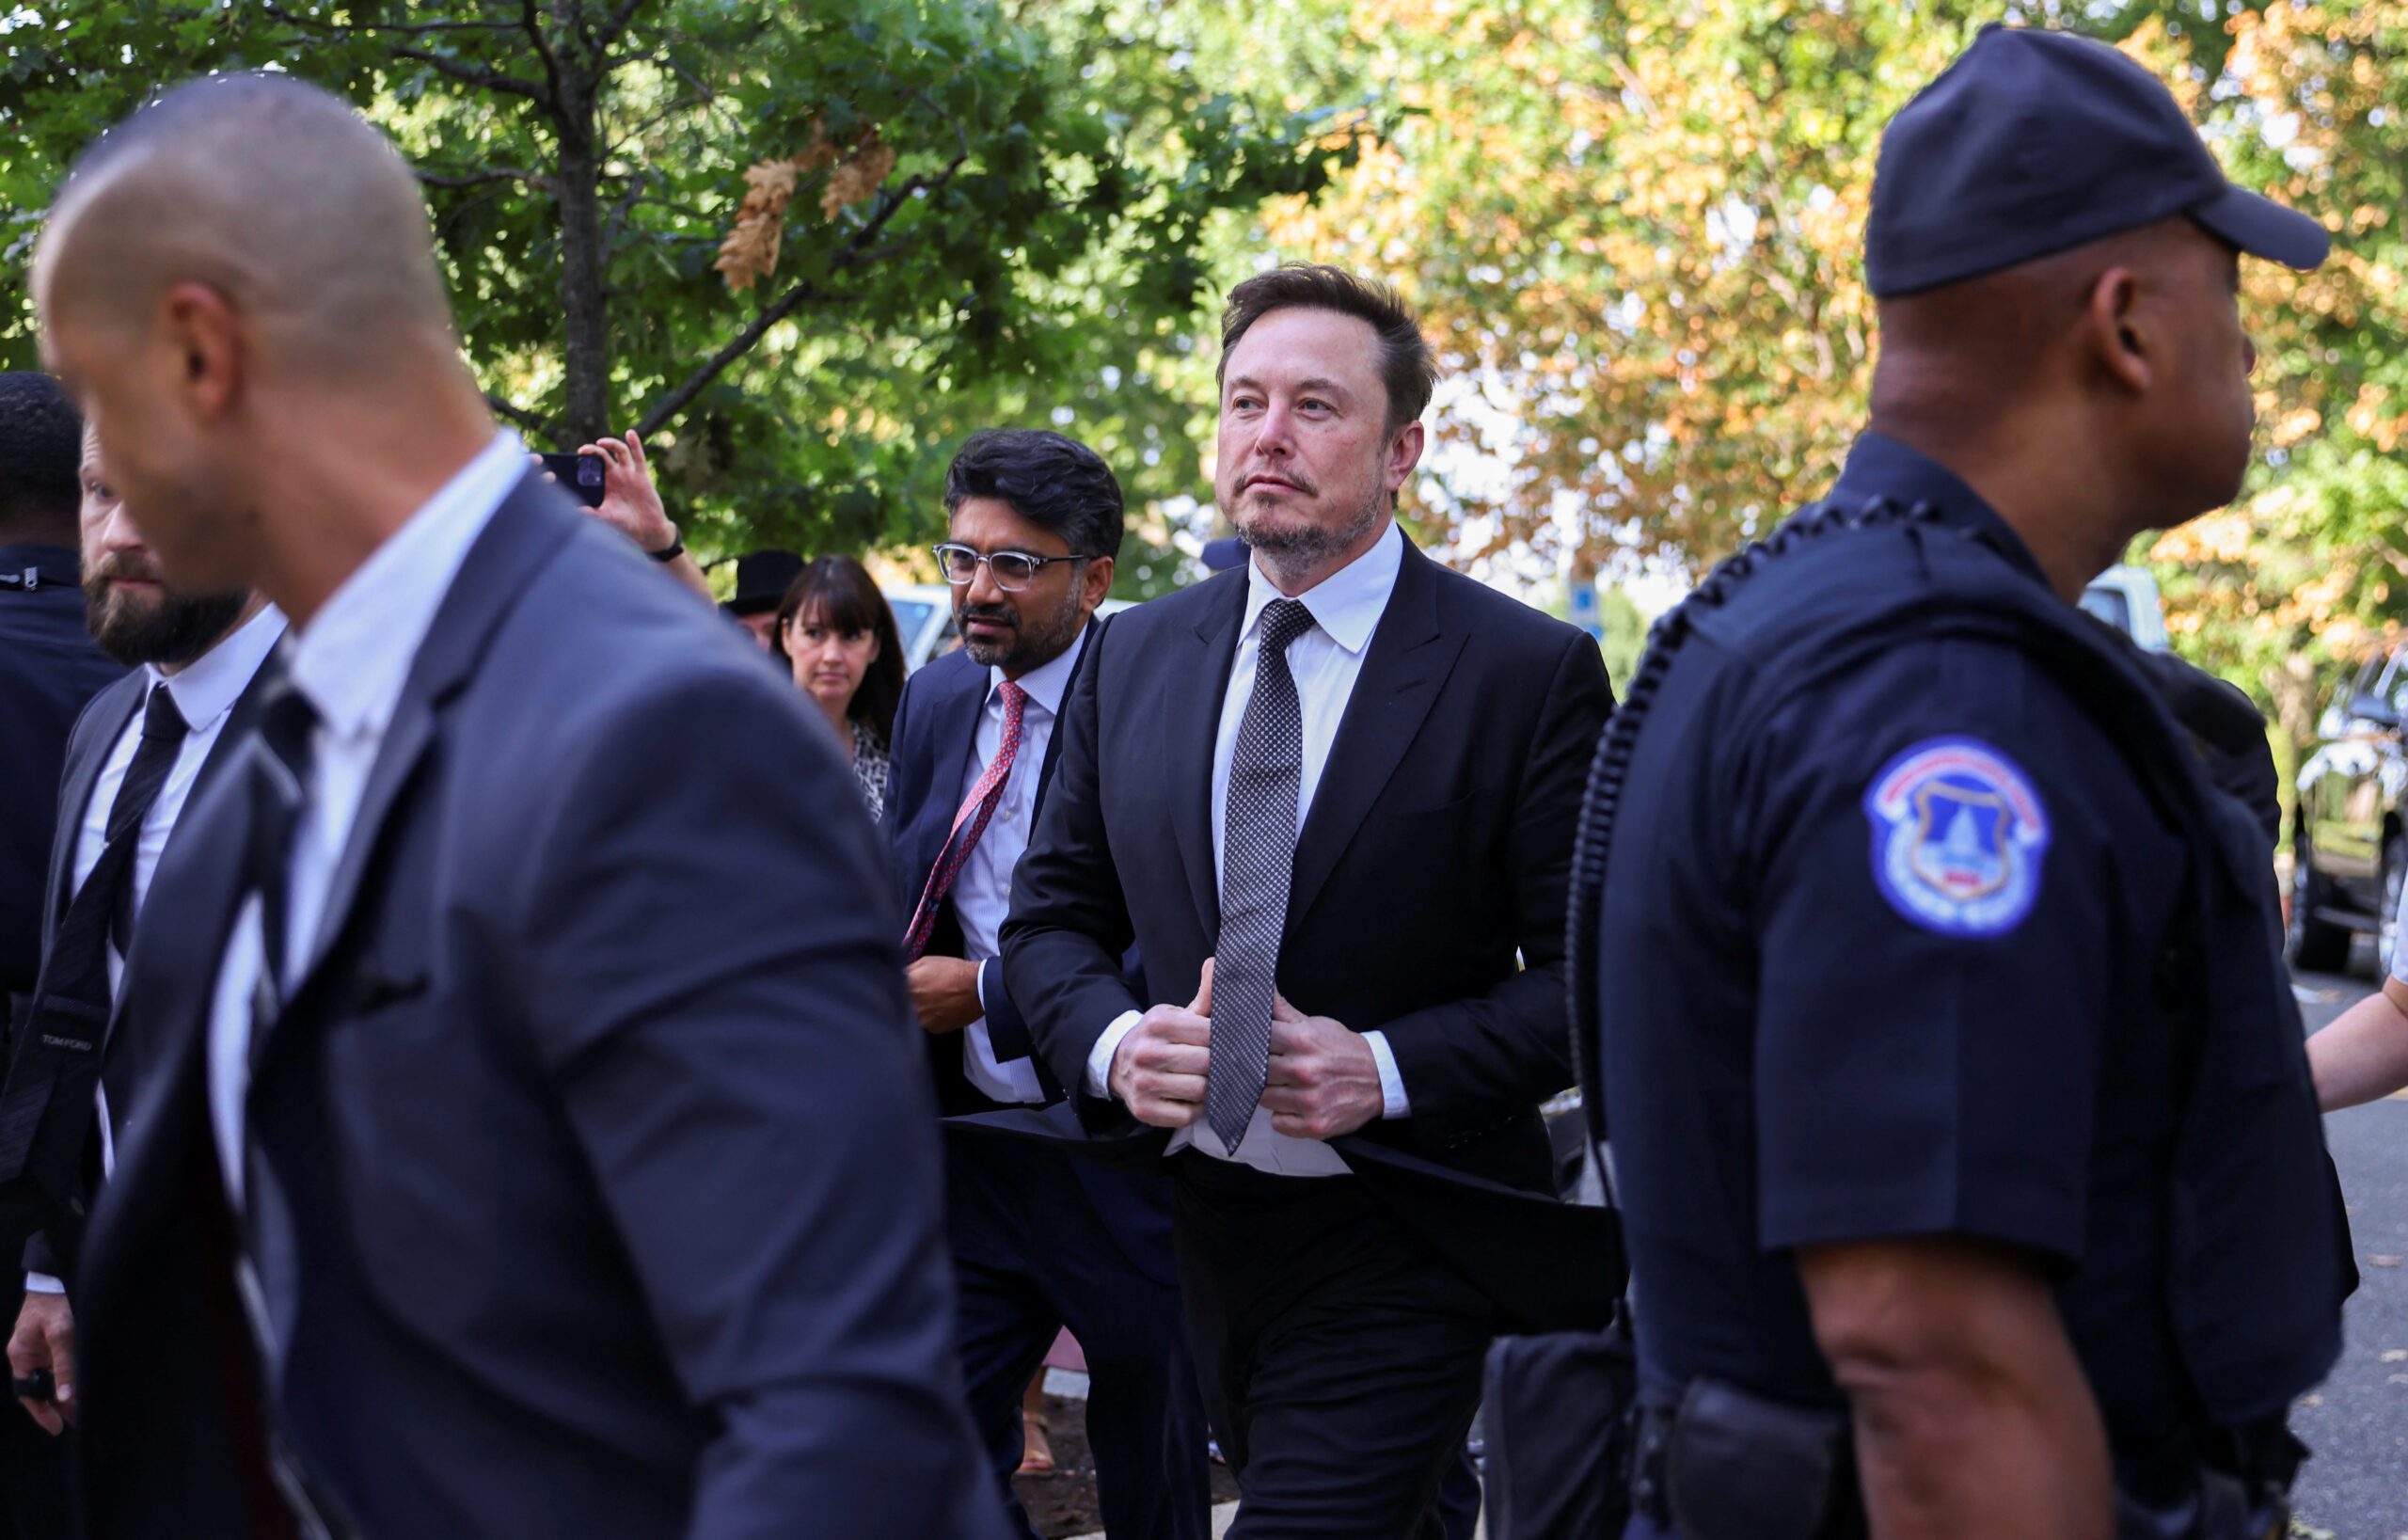 Tech titans meet US lawmakers, Musk seeks ‘referee’ for AI